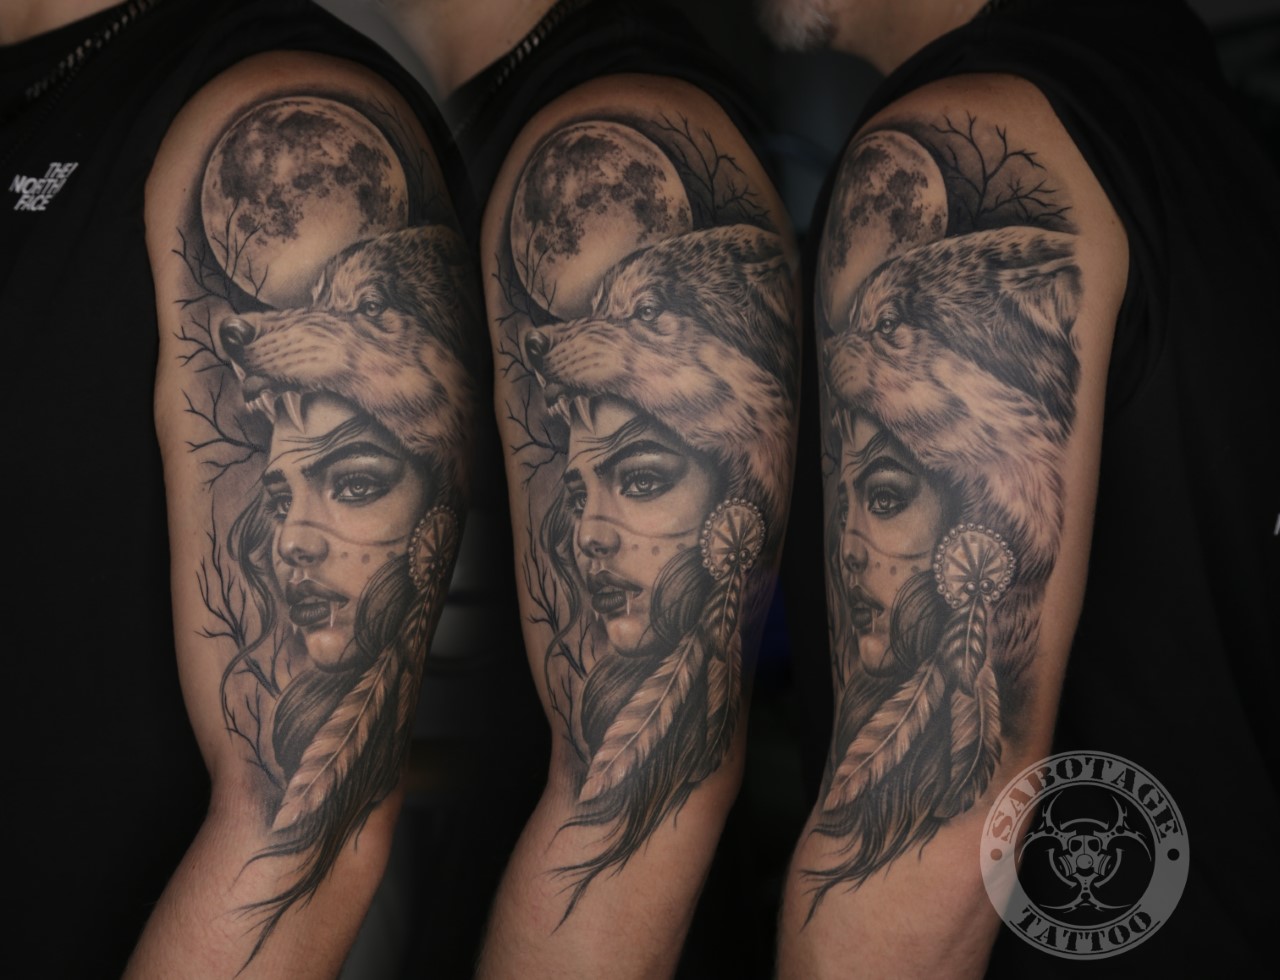 Our Tattoo Picture Gallery - Sabotage Tattoo, find your style!